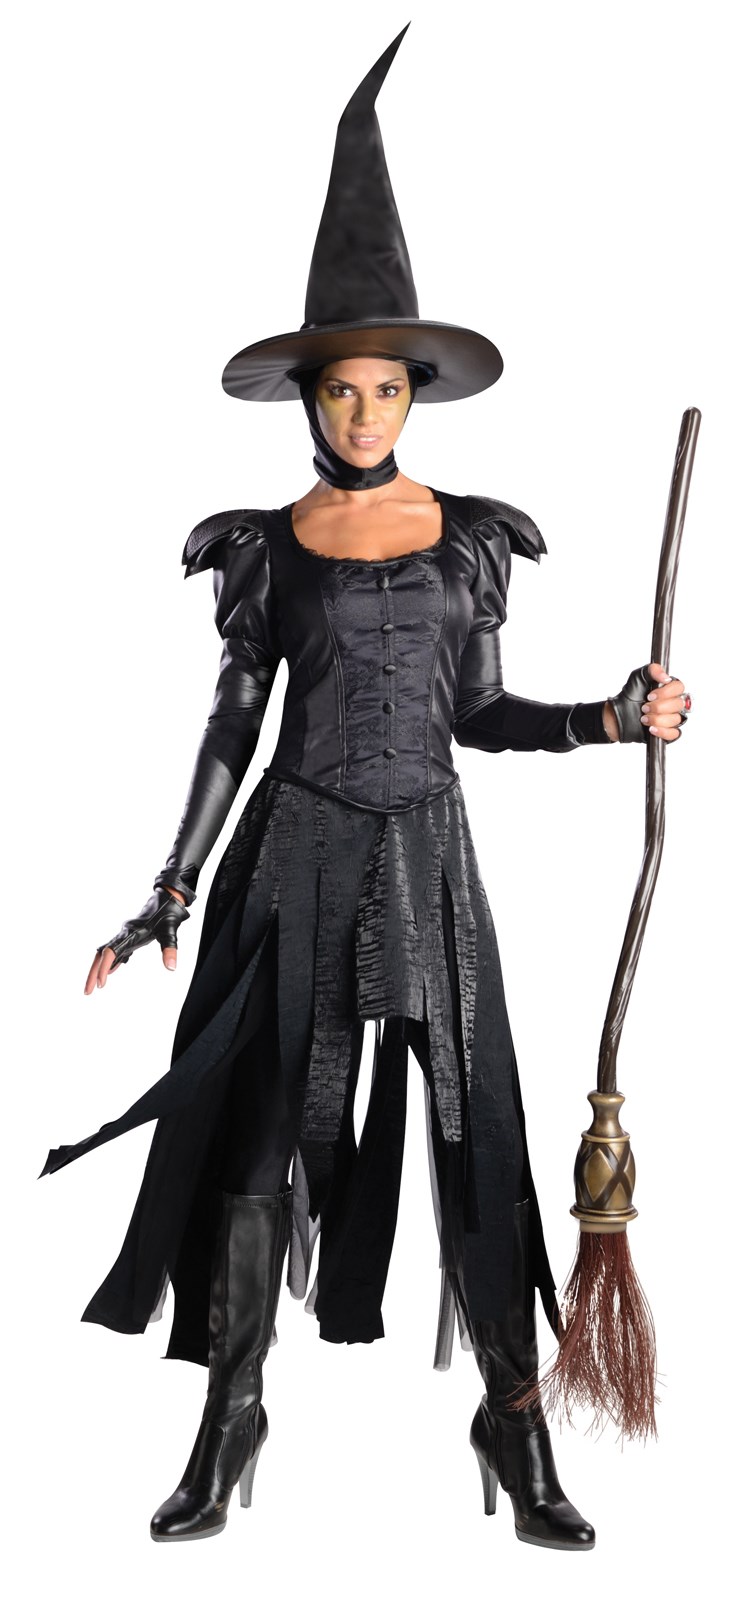 Oz The Great And Powerful Deluxe Wicked Witch of the West Adult Costume